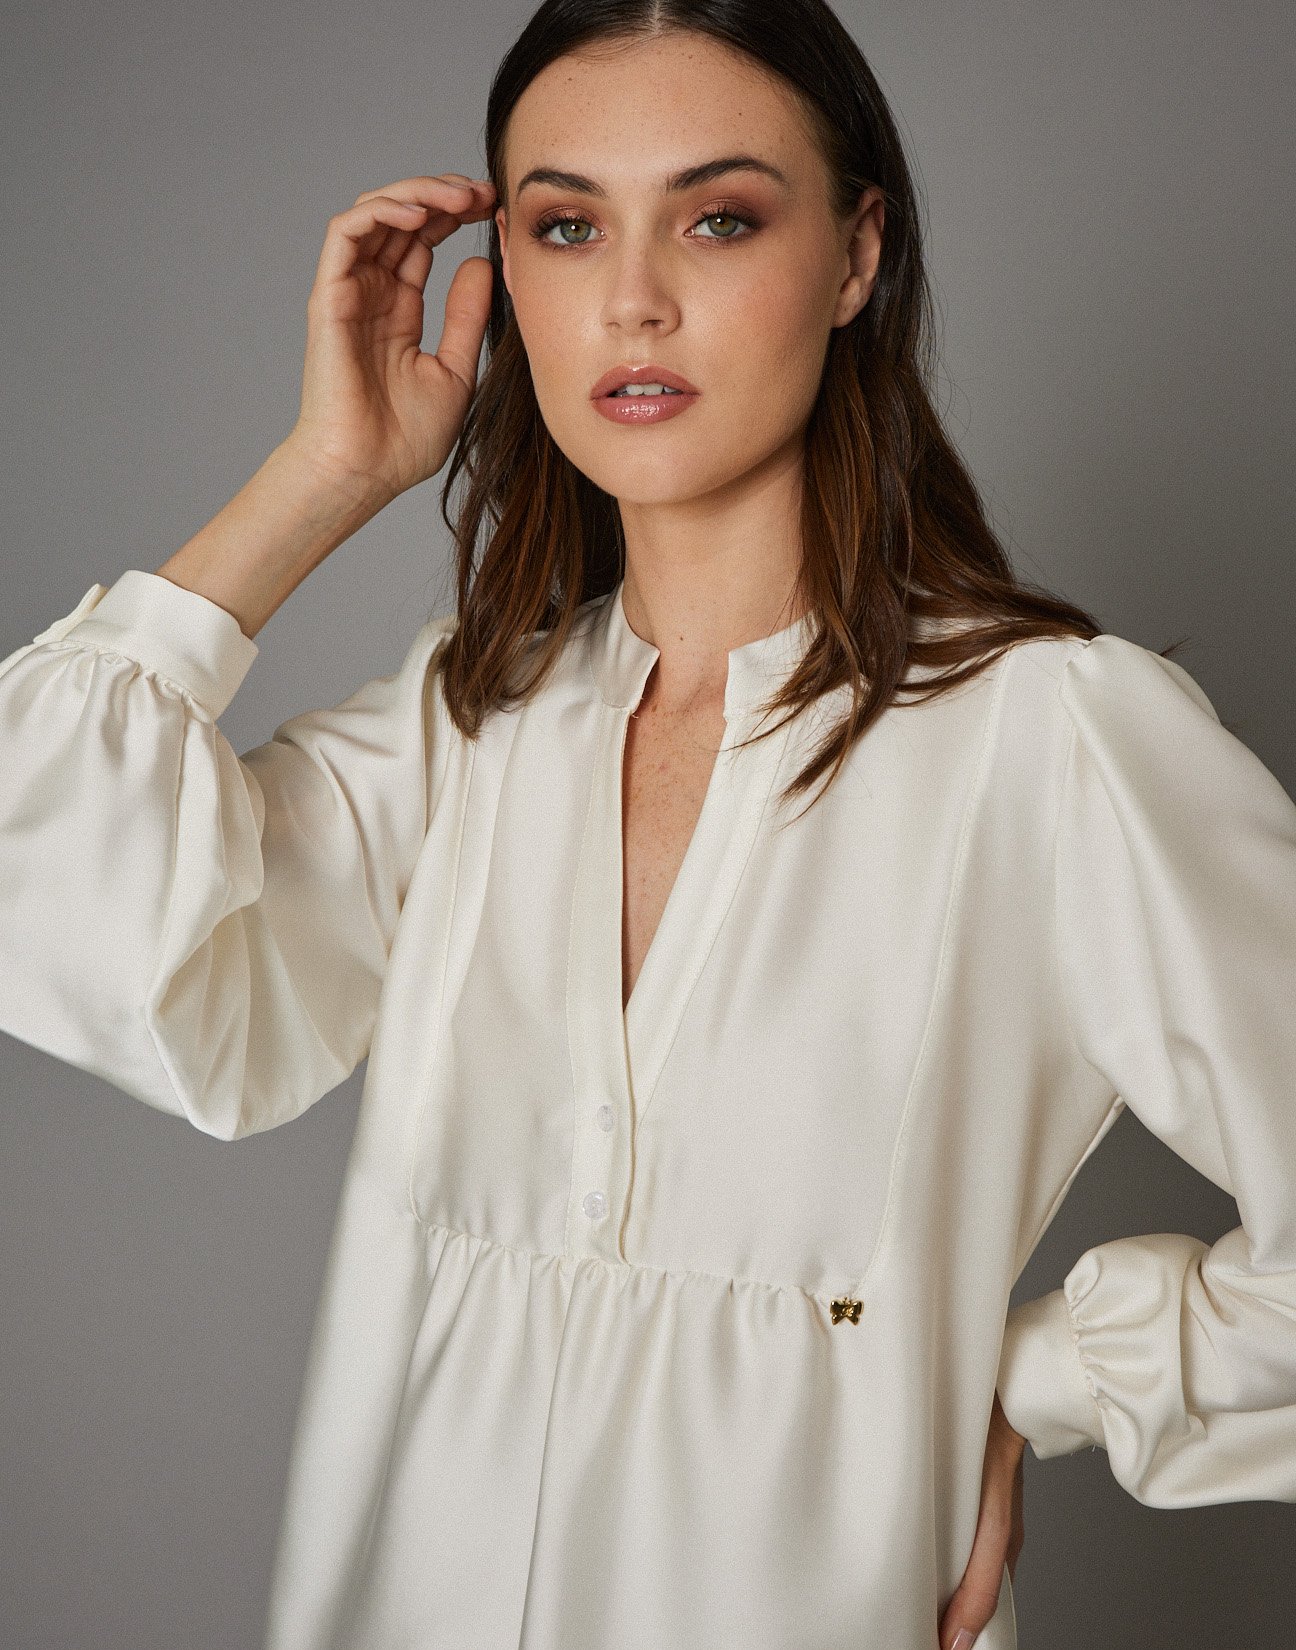 Satin blouse with buttons